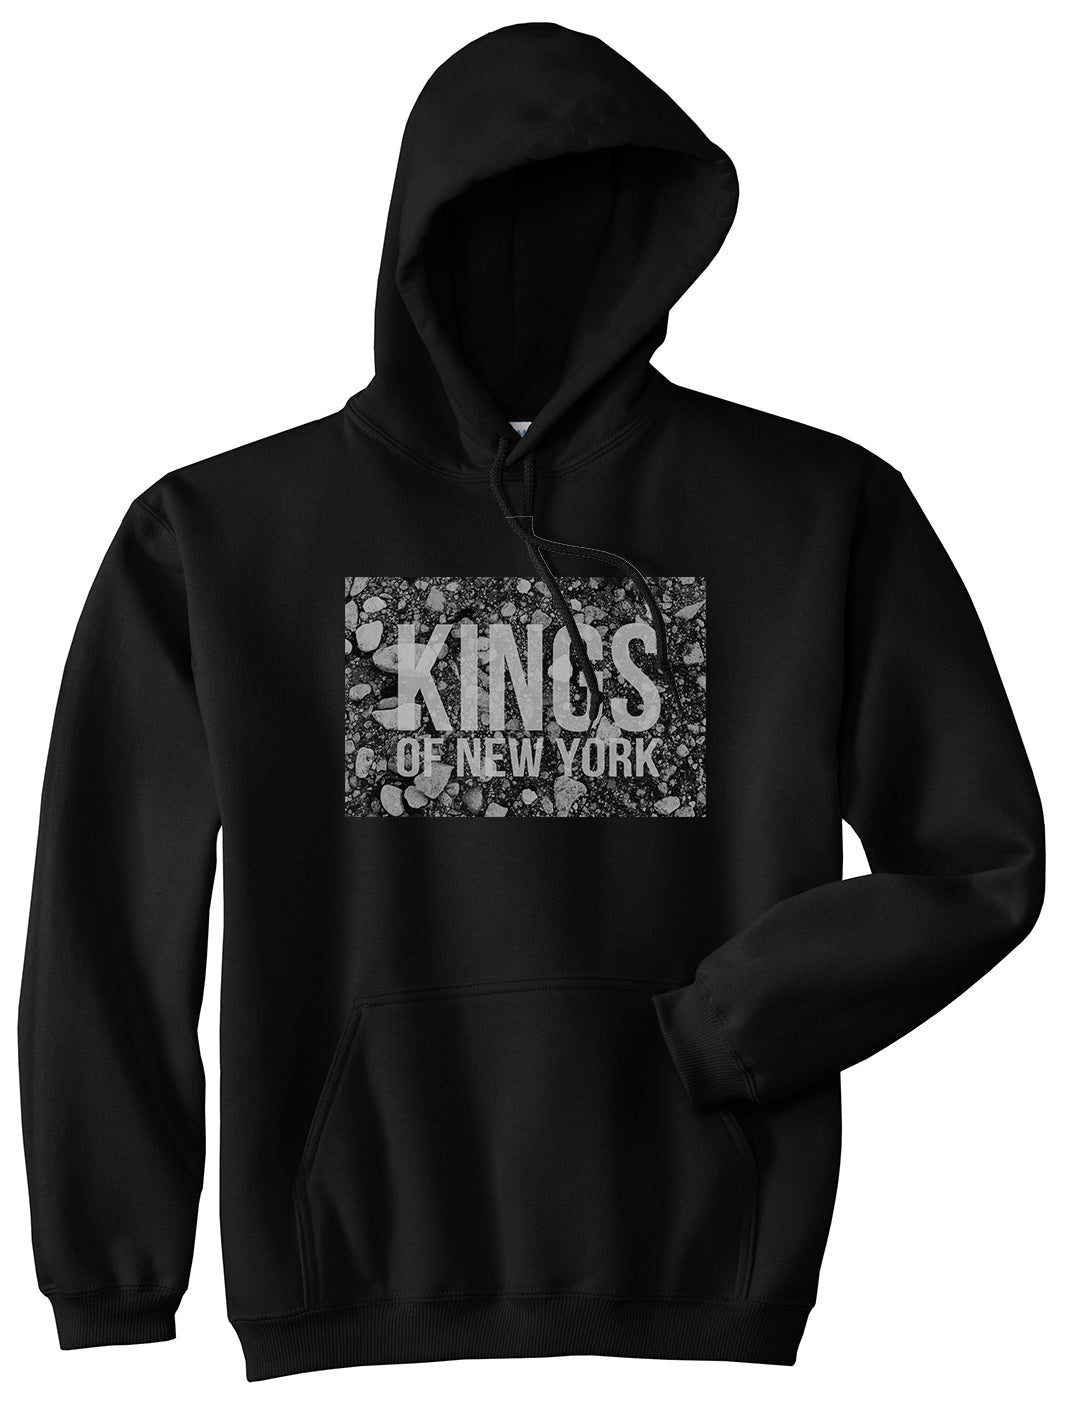 Came From The Dirt KONY Mens Pullover Hoodie Black